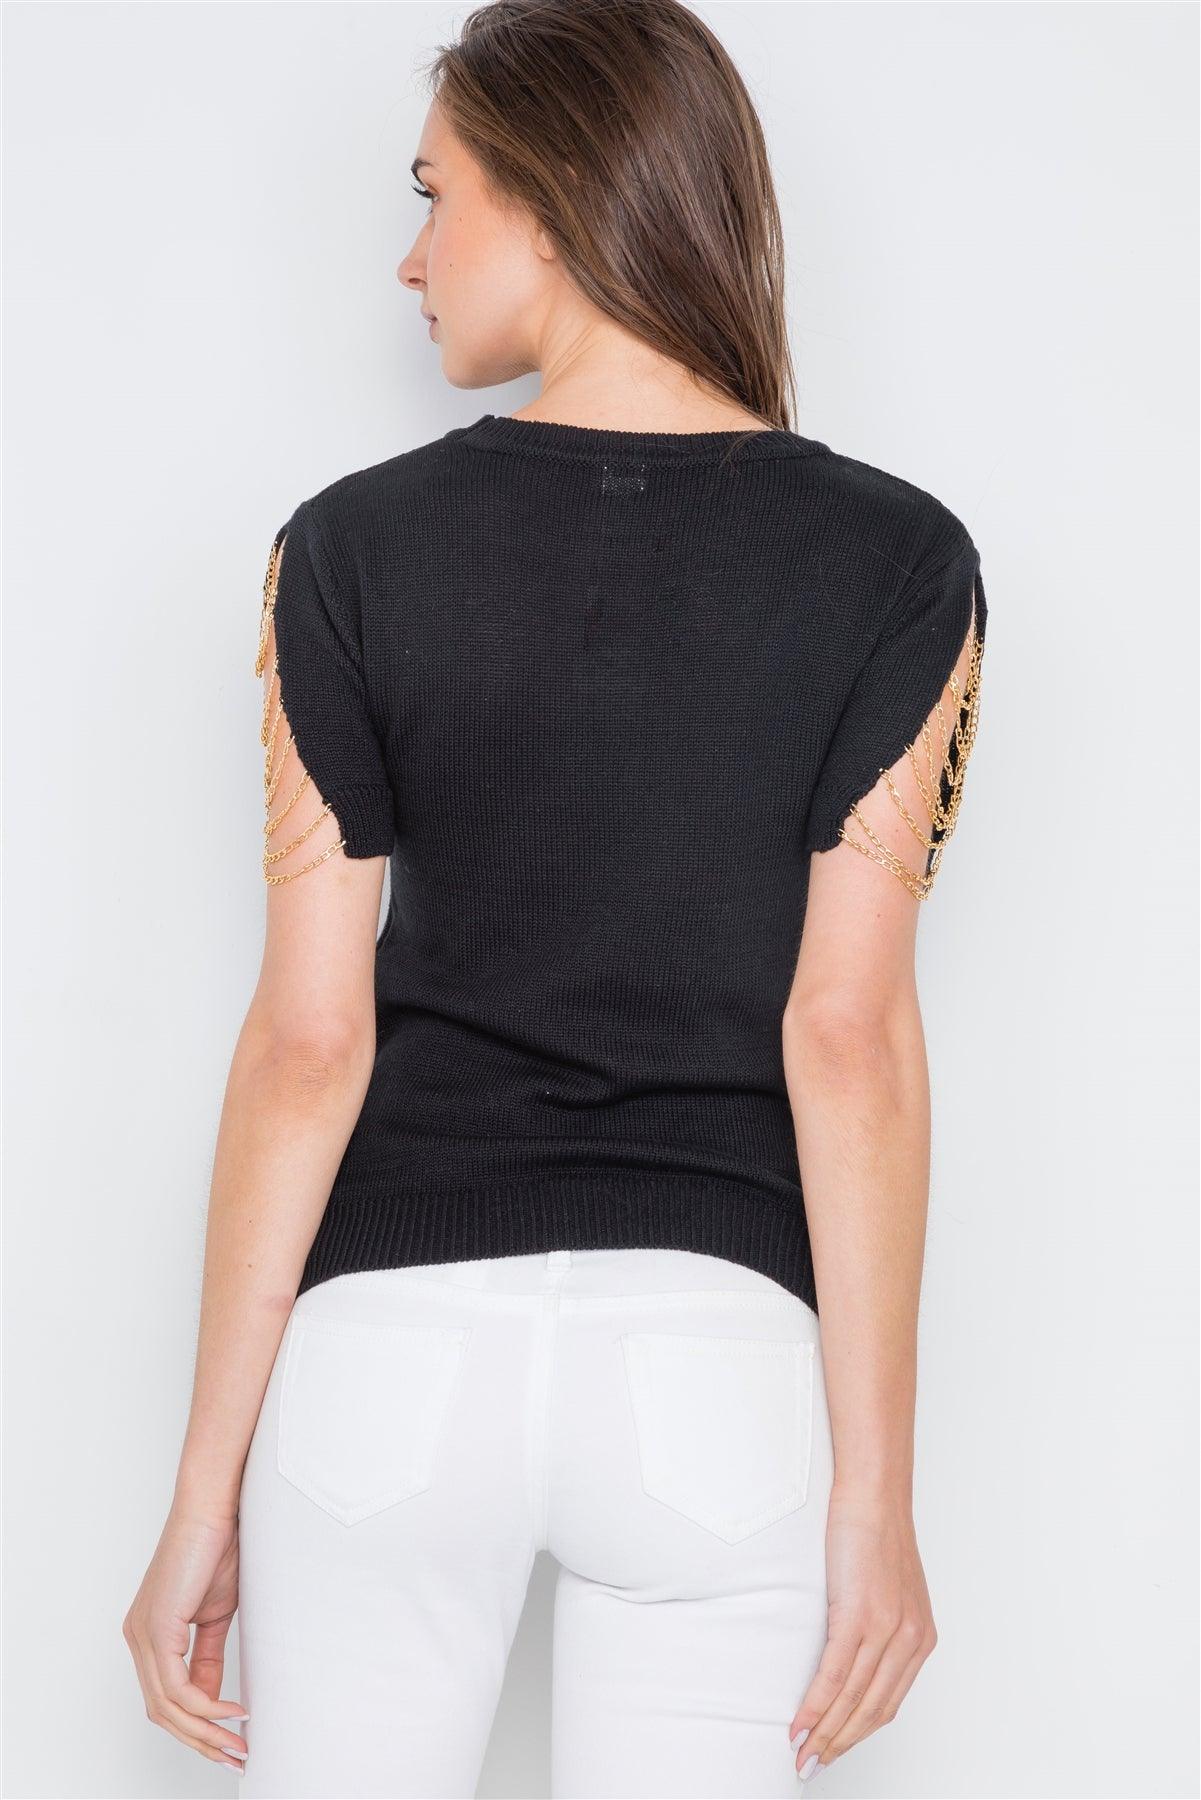 Black Chain Sleeves Cut Out Knit Top /4-2